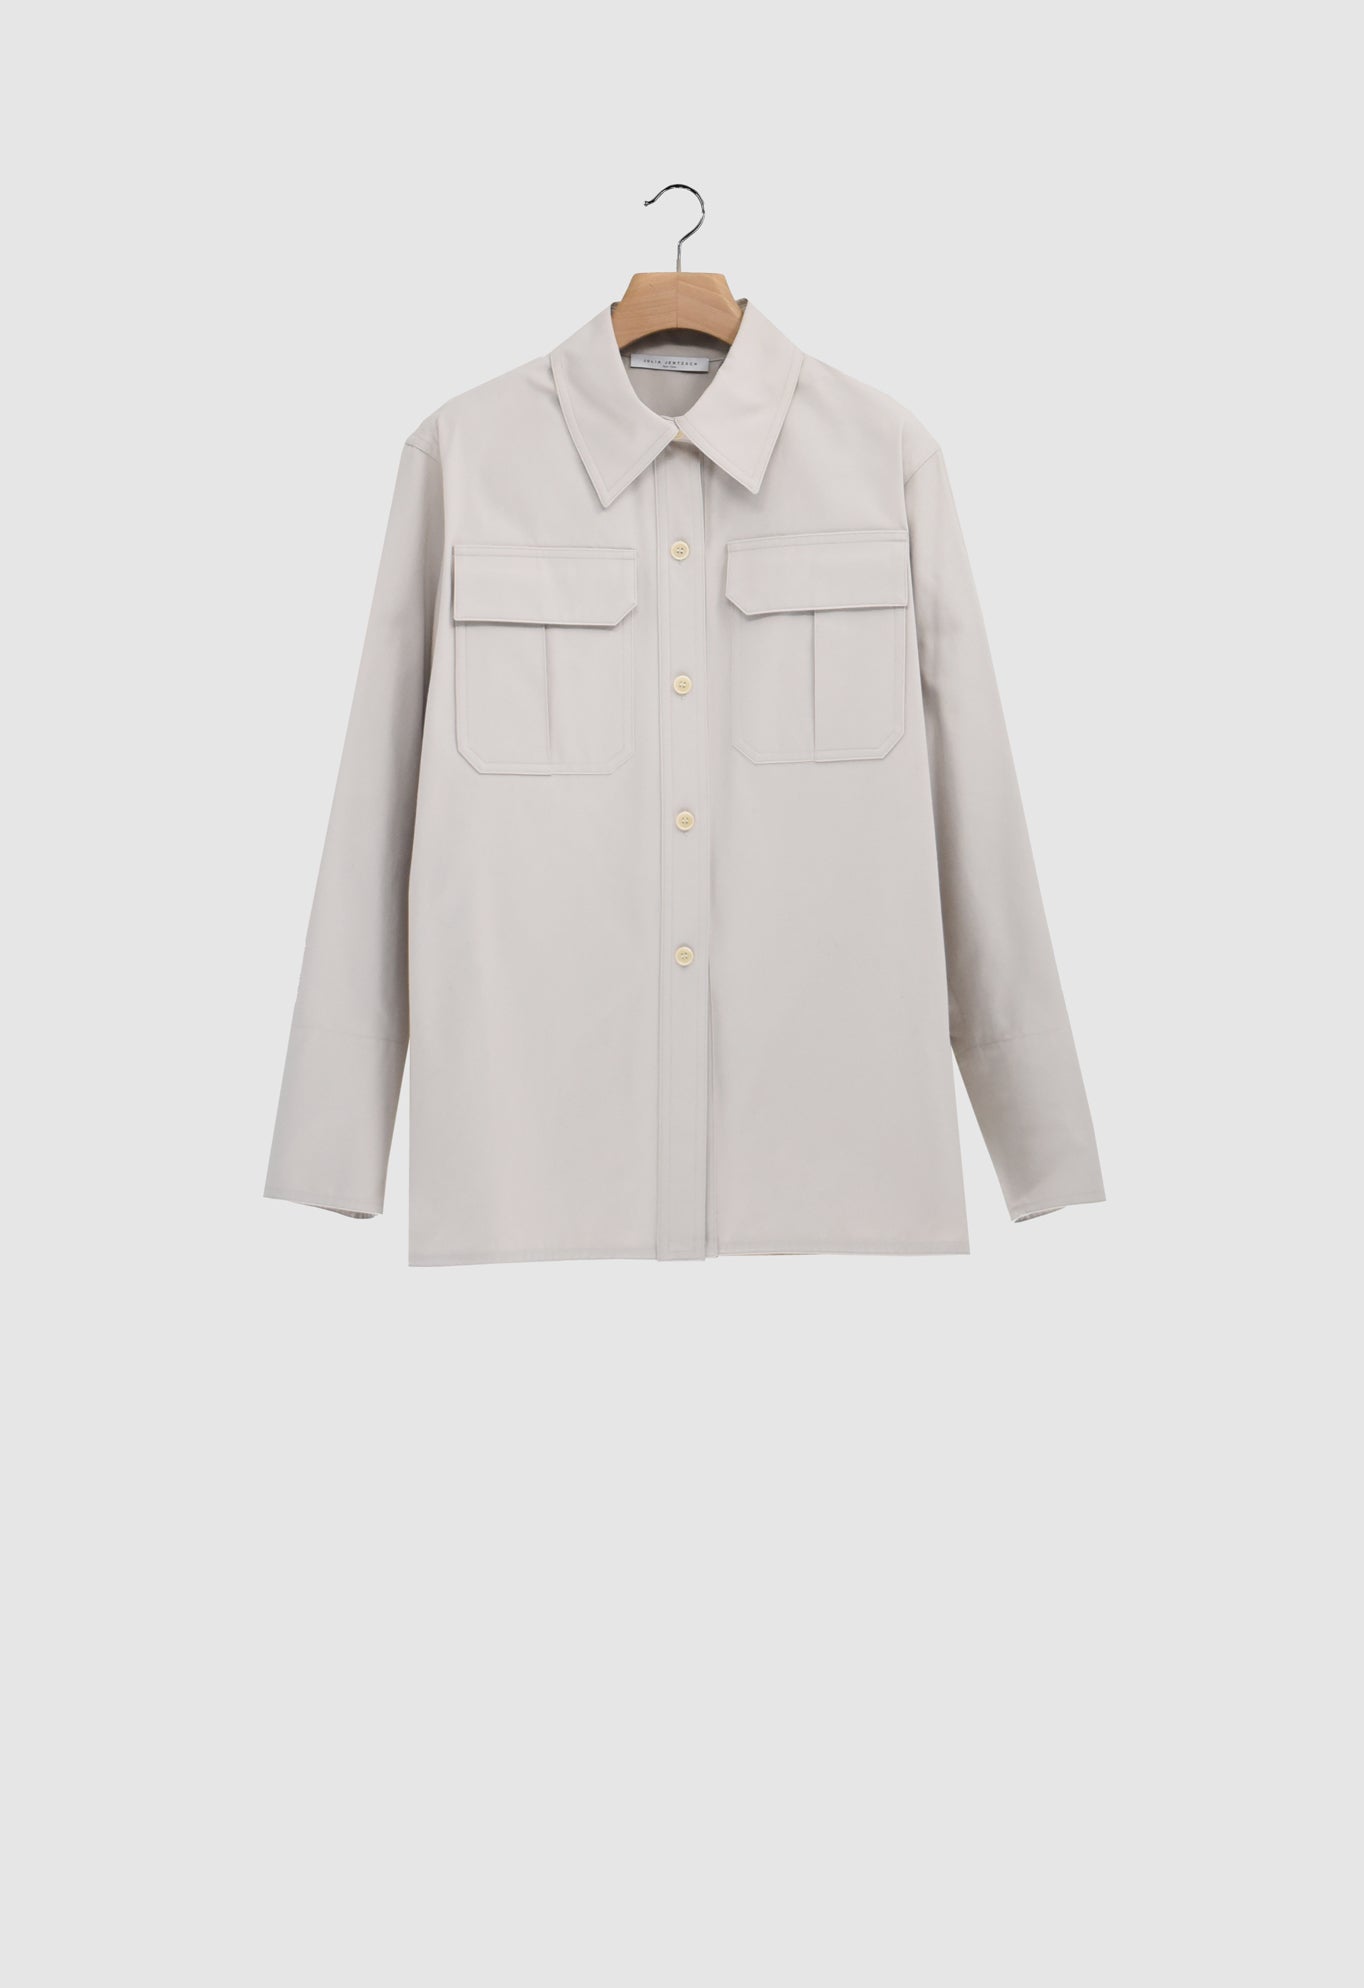 XENIA - Overshirt in Cotton Twill in Light Taupe